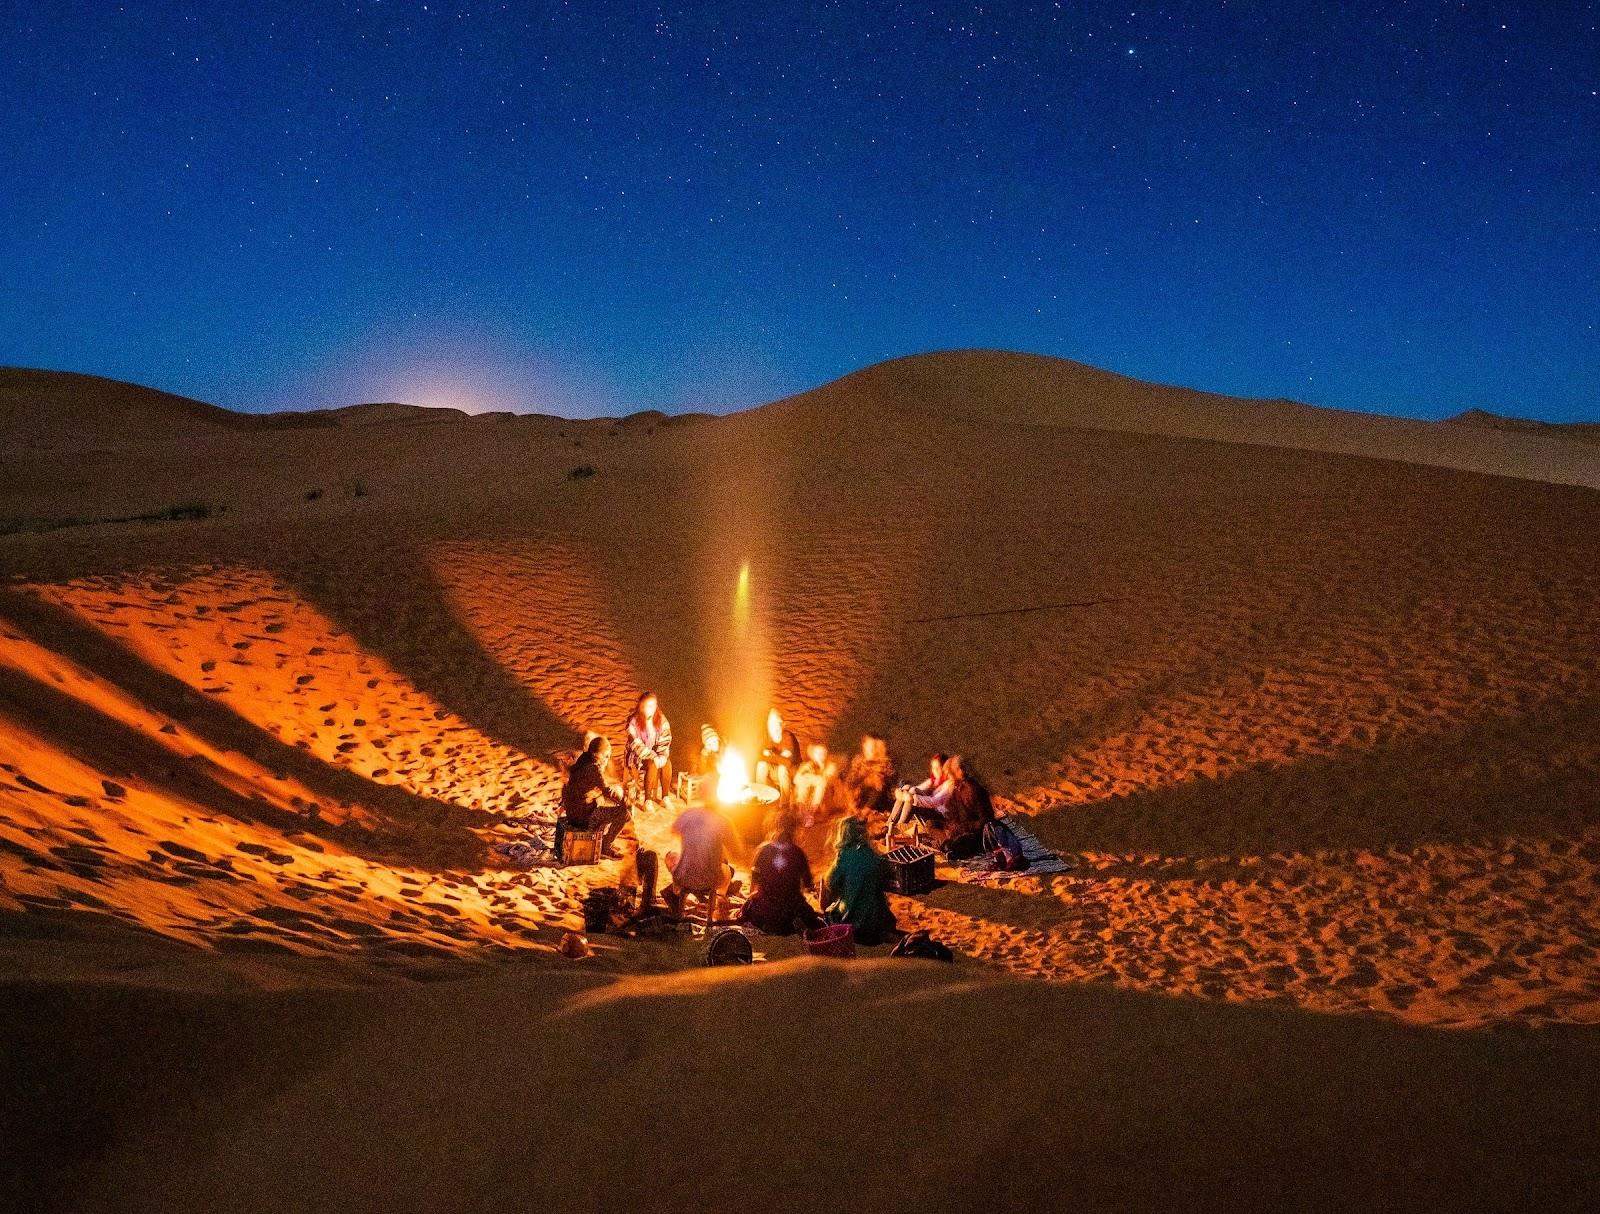 Tourists camping in the Sahara at desert at night, crowding round a fire.